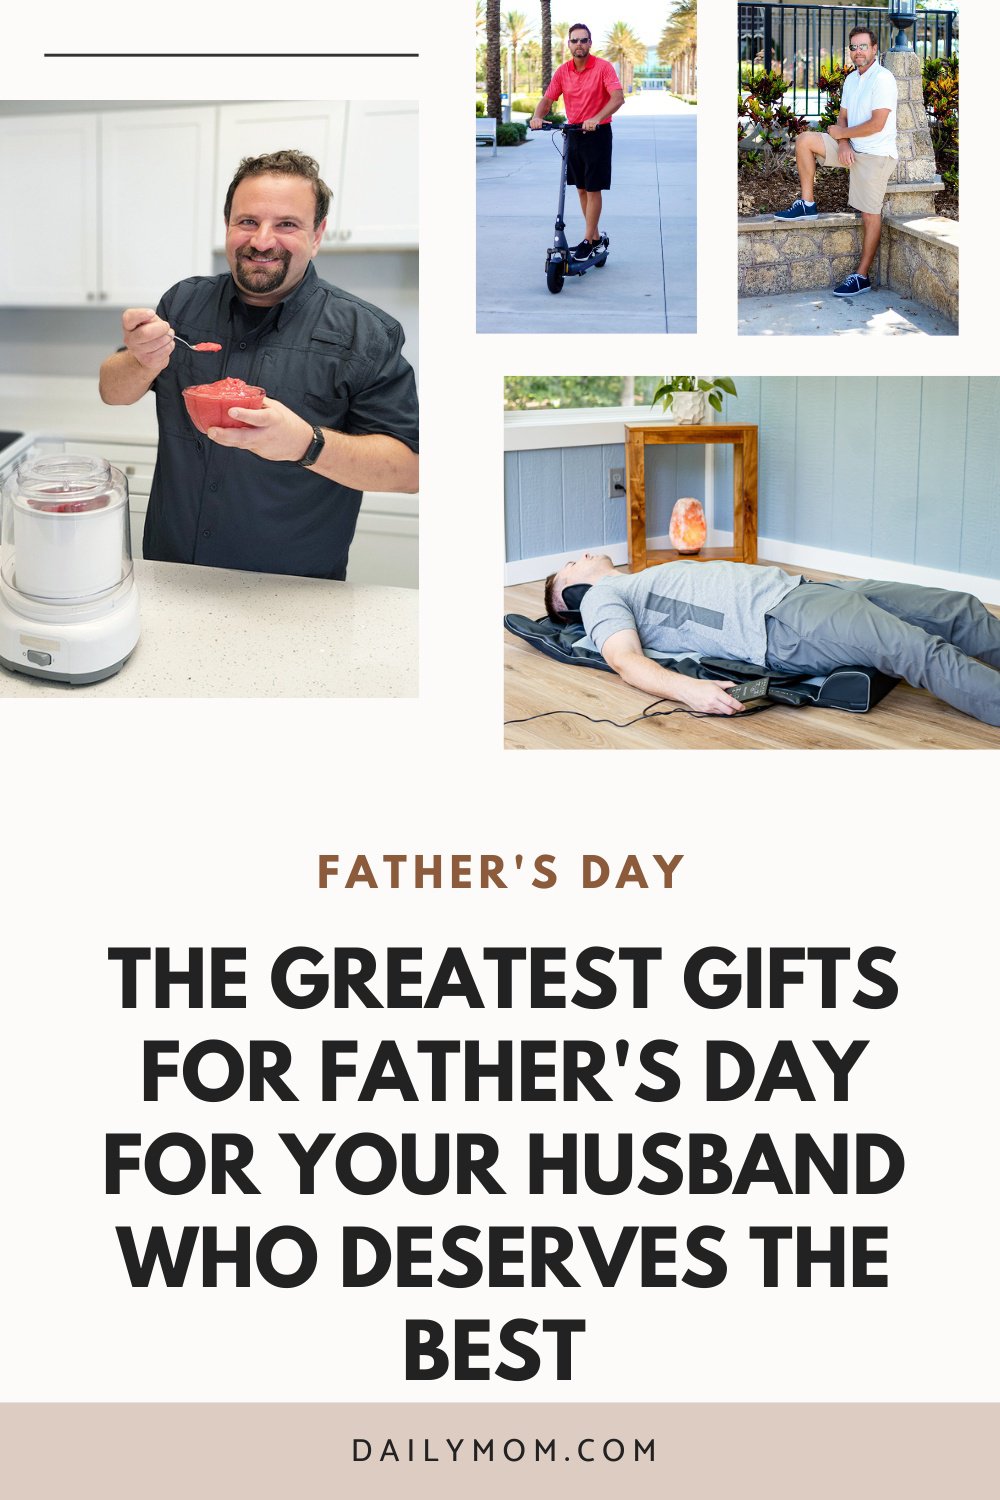 22 Greatest Gifts For Father's Day For Your Husband Who Deserves The Best